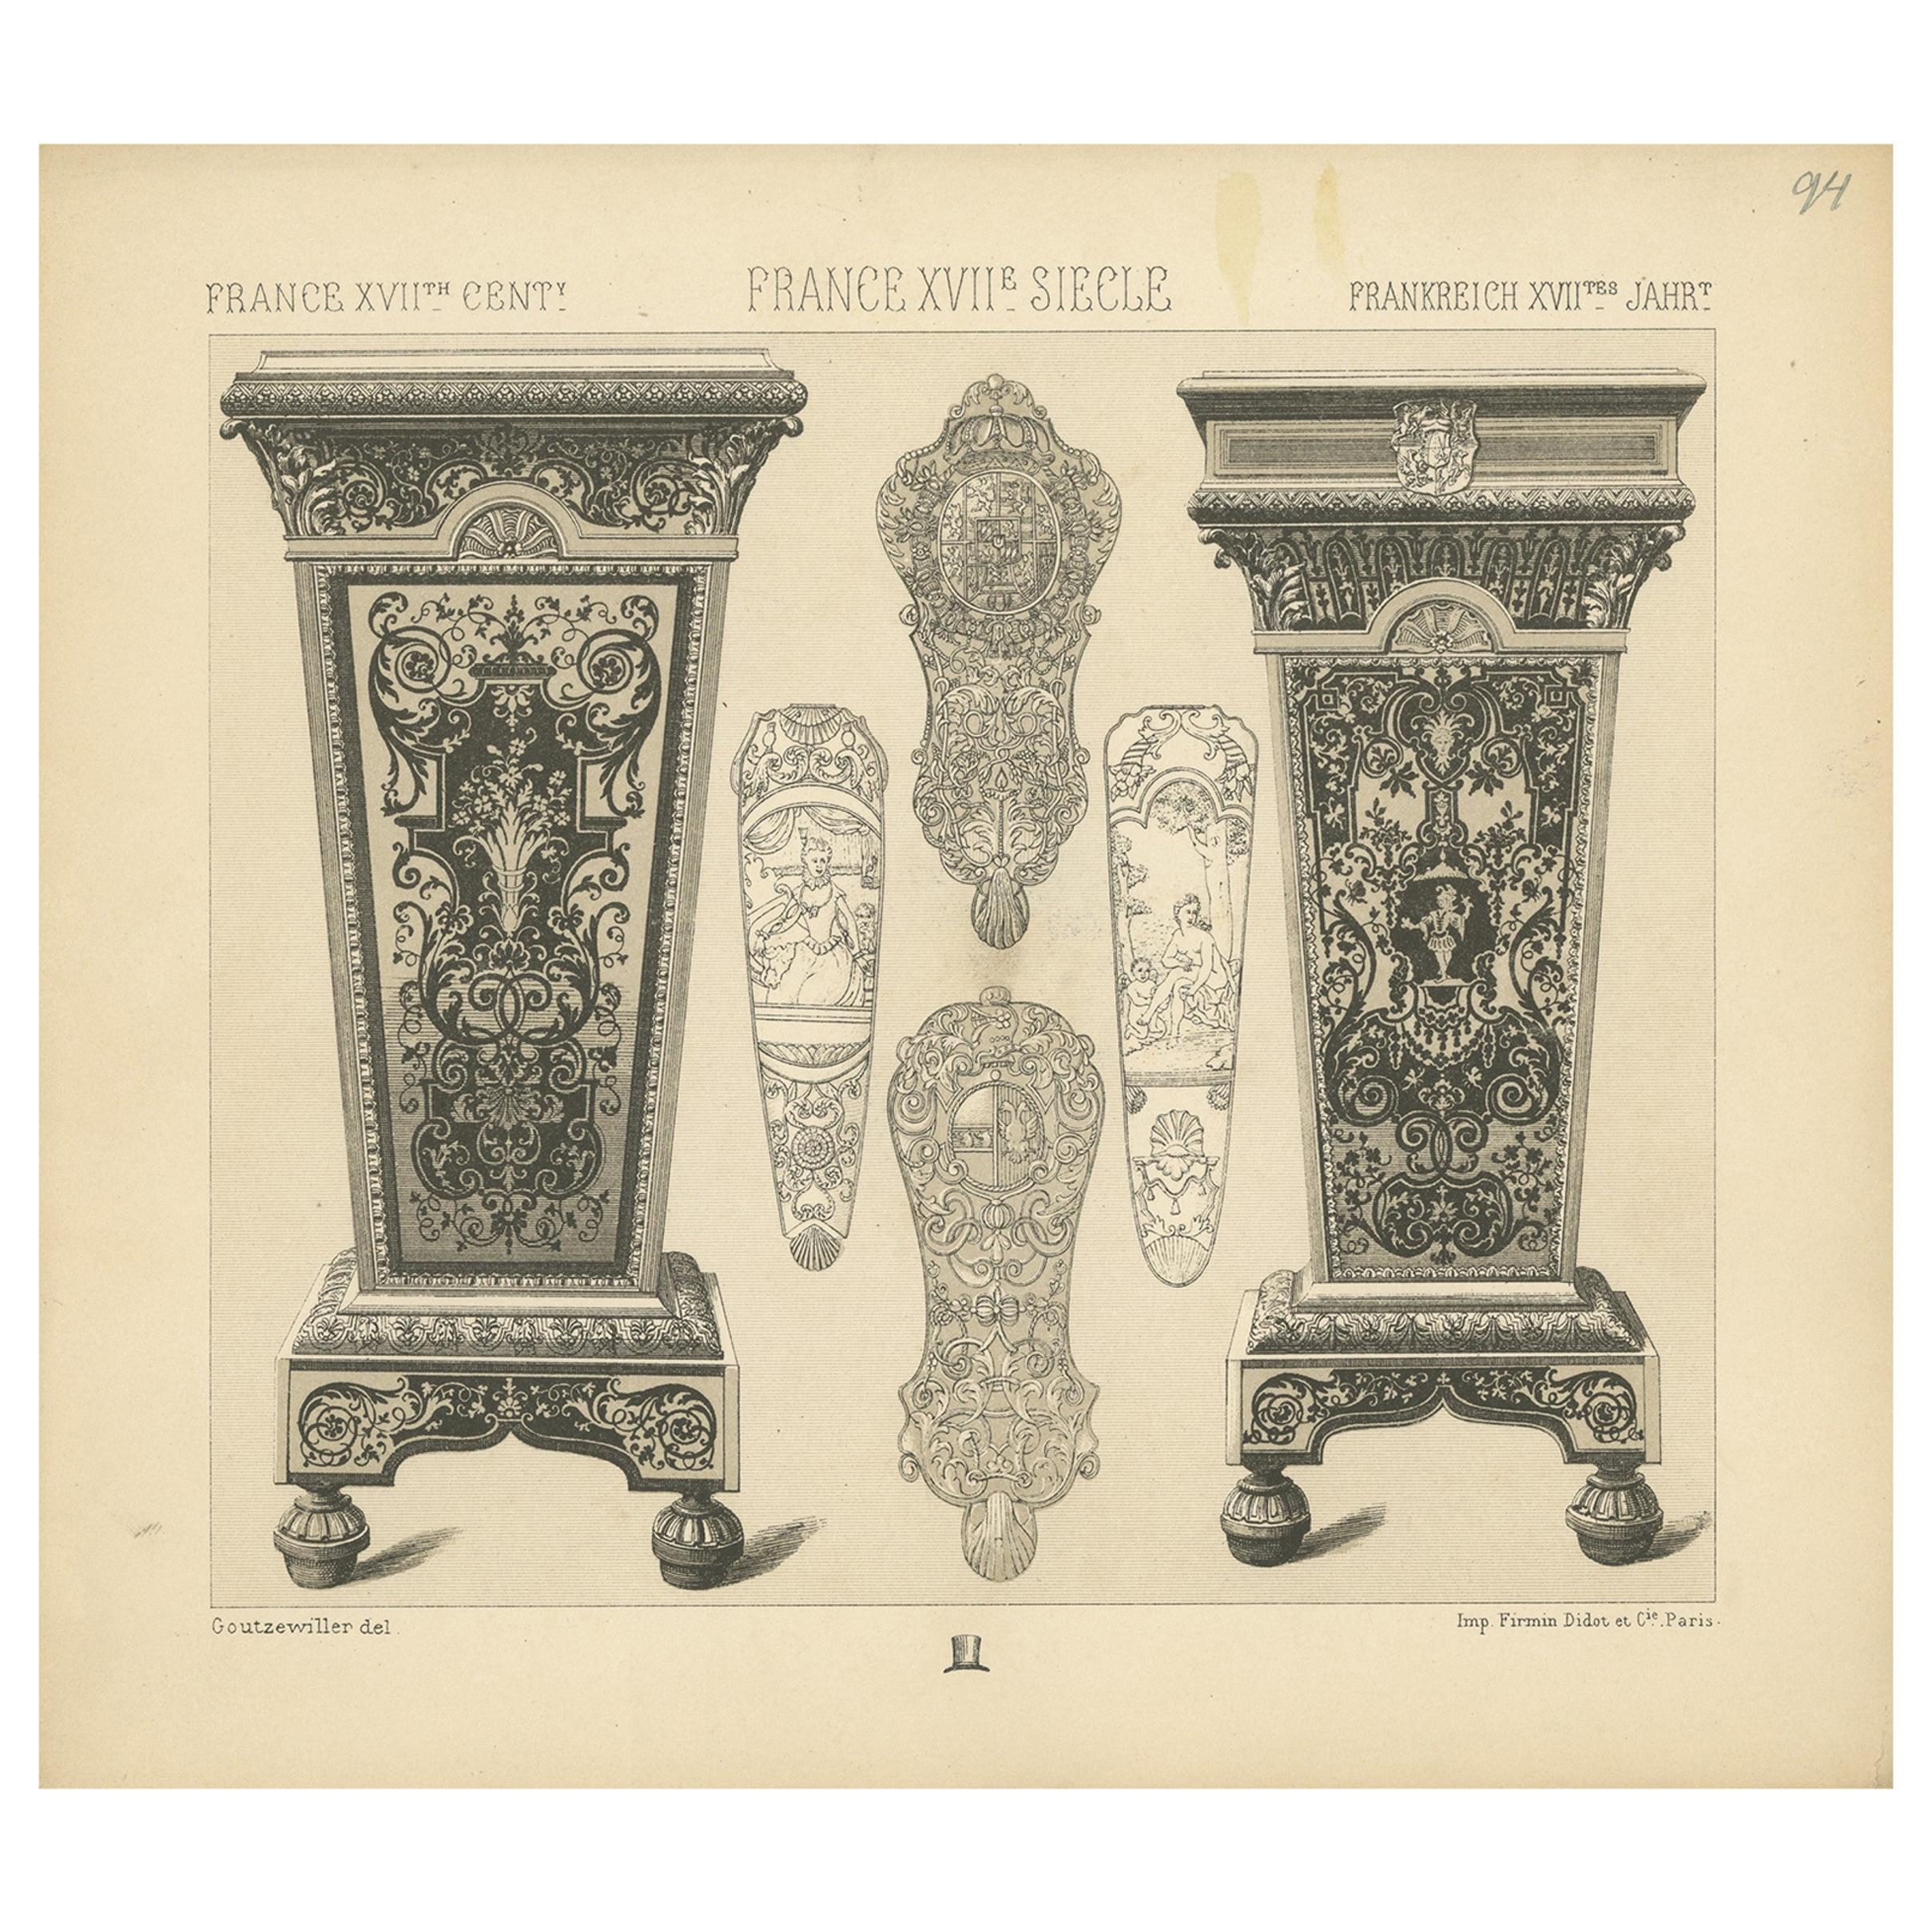 Pl. 94 Antique Print of French 17th Century Decoration by Racinet, circa 1880